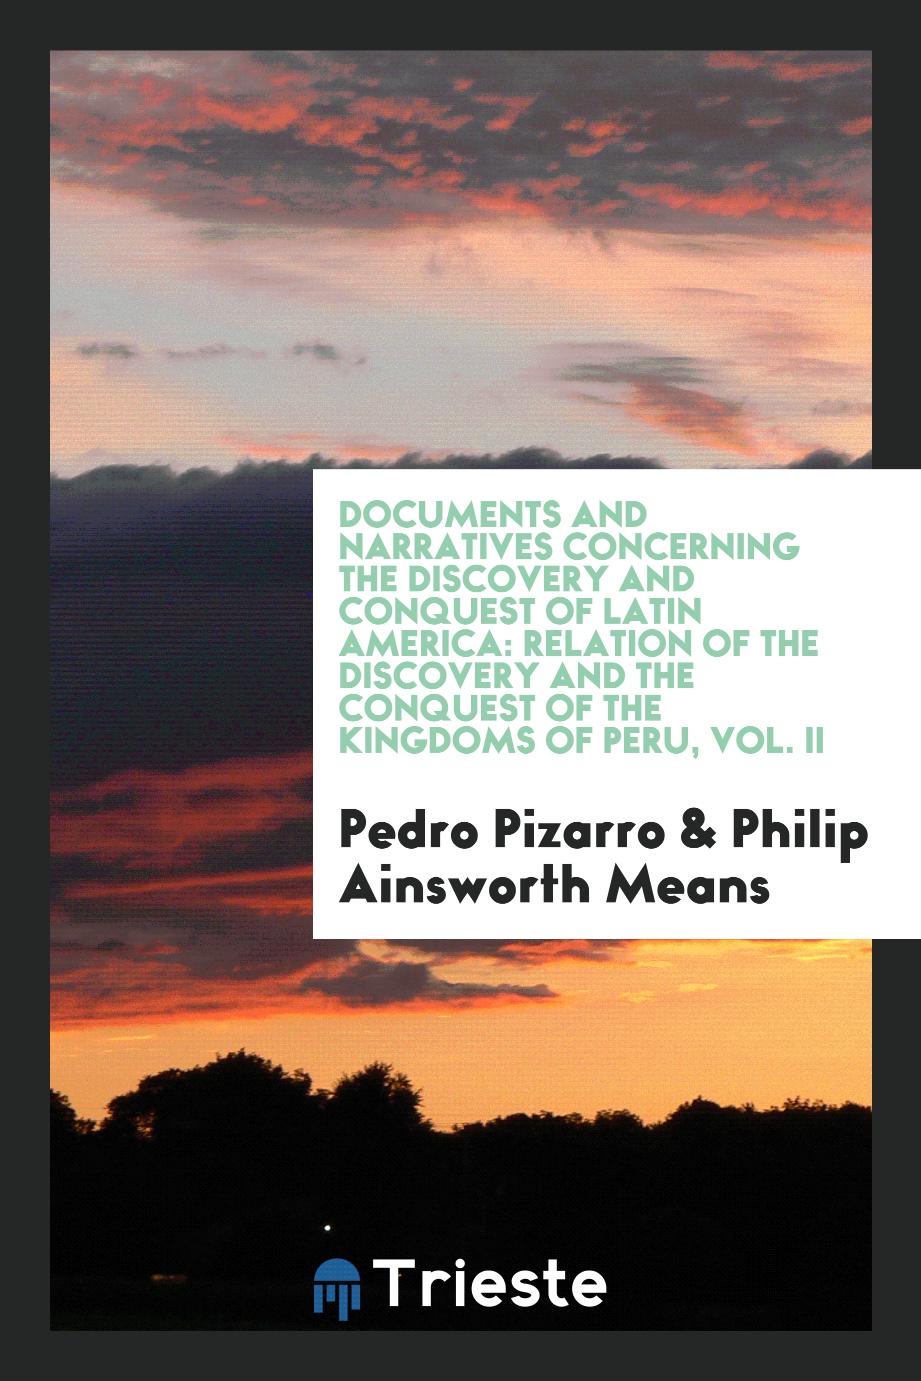 Documents and narratives concerning the discovery and conquest of Latin America: Relation of the discovery and the conquest of the kingdoms of Peru, Vol. II